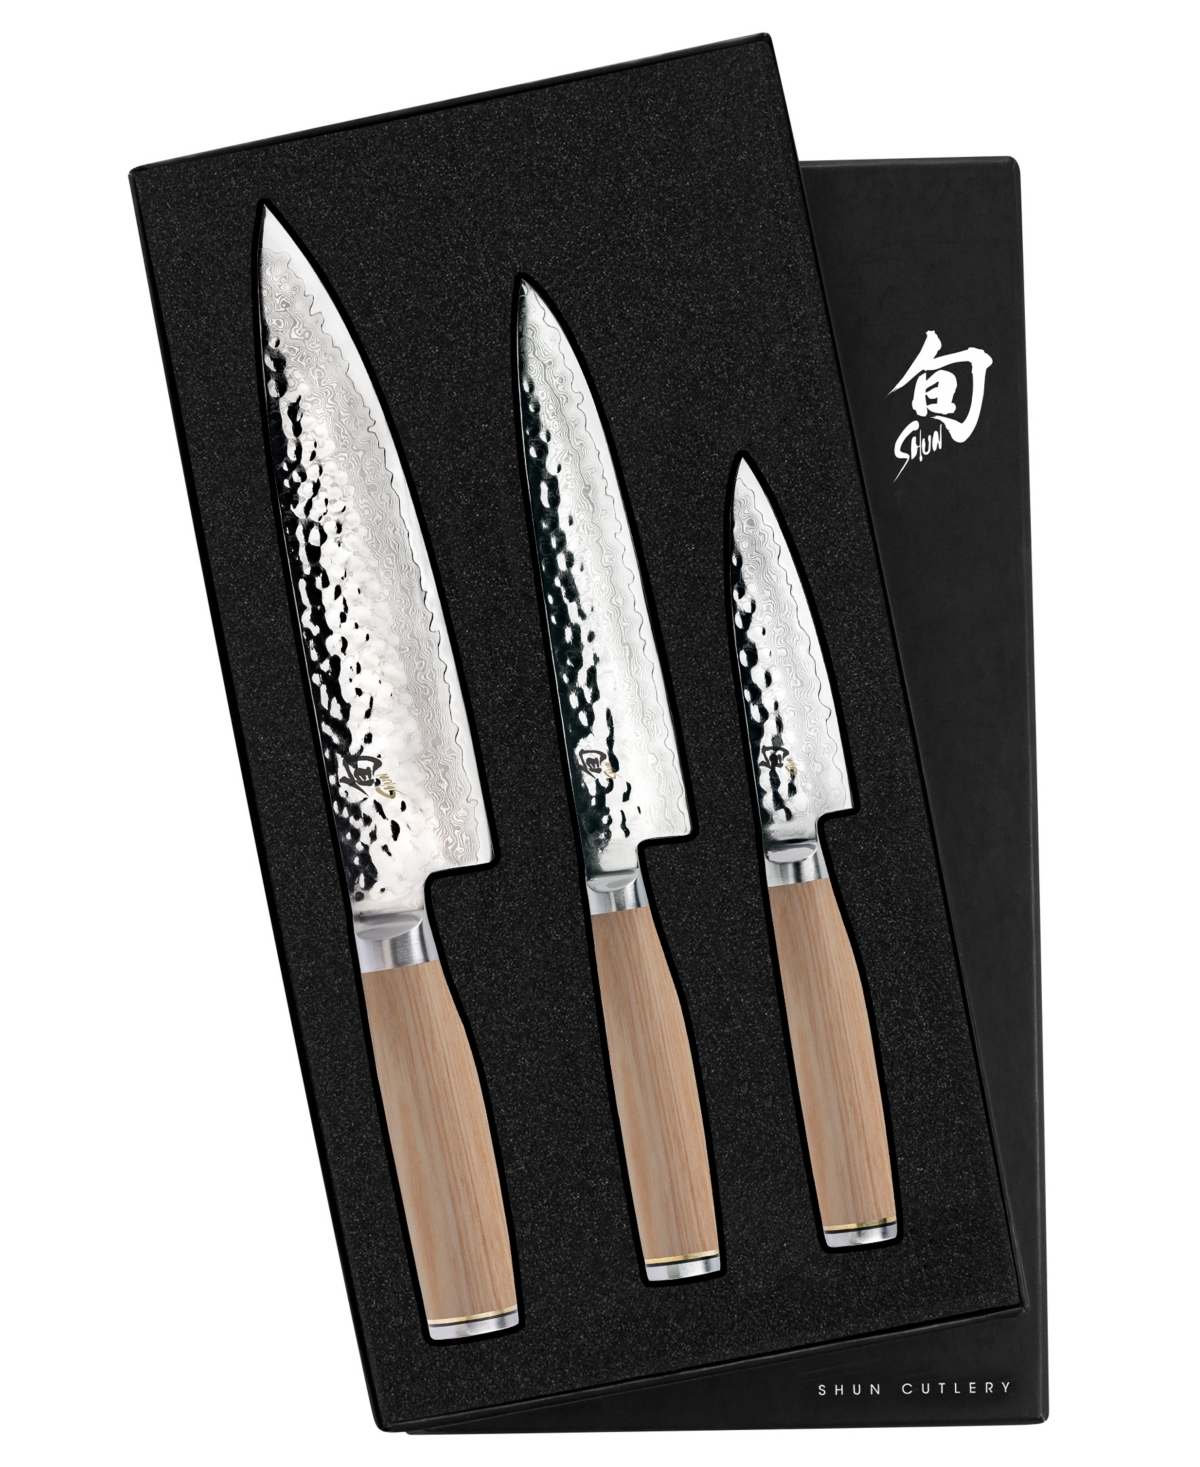 Shun Stainless Steel Premier Blonde 3 Pc. Knife Set: Paring 4", Utility 6.5", Chef's 8" In A Boxed Set. In Brown